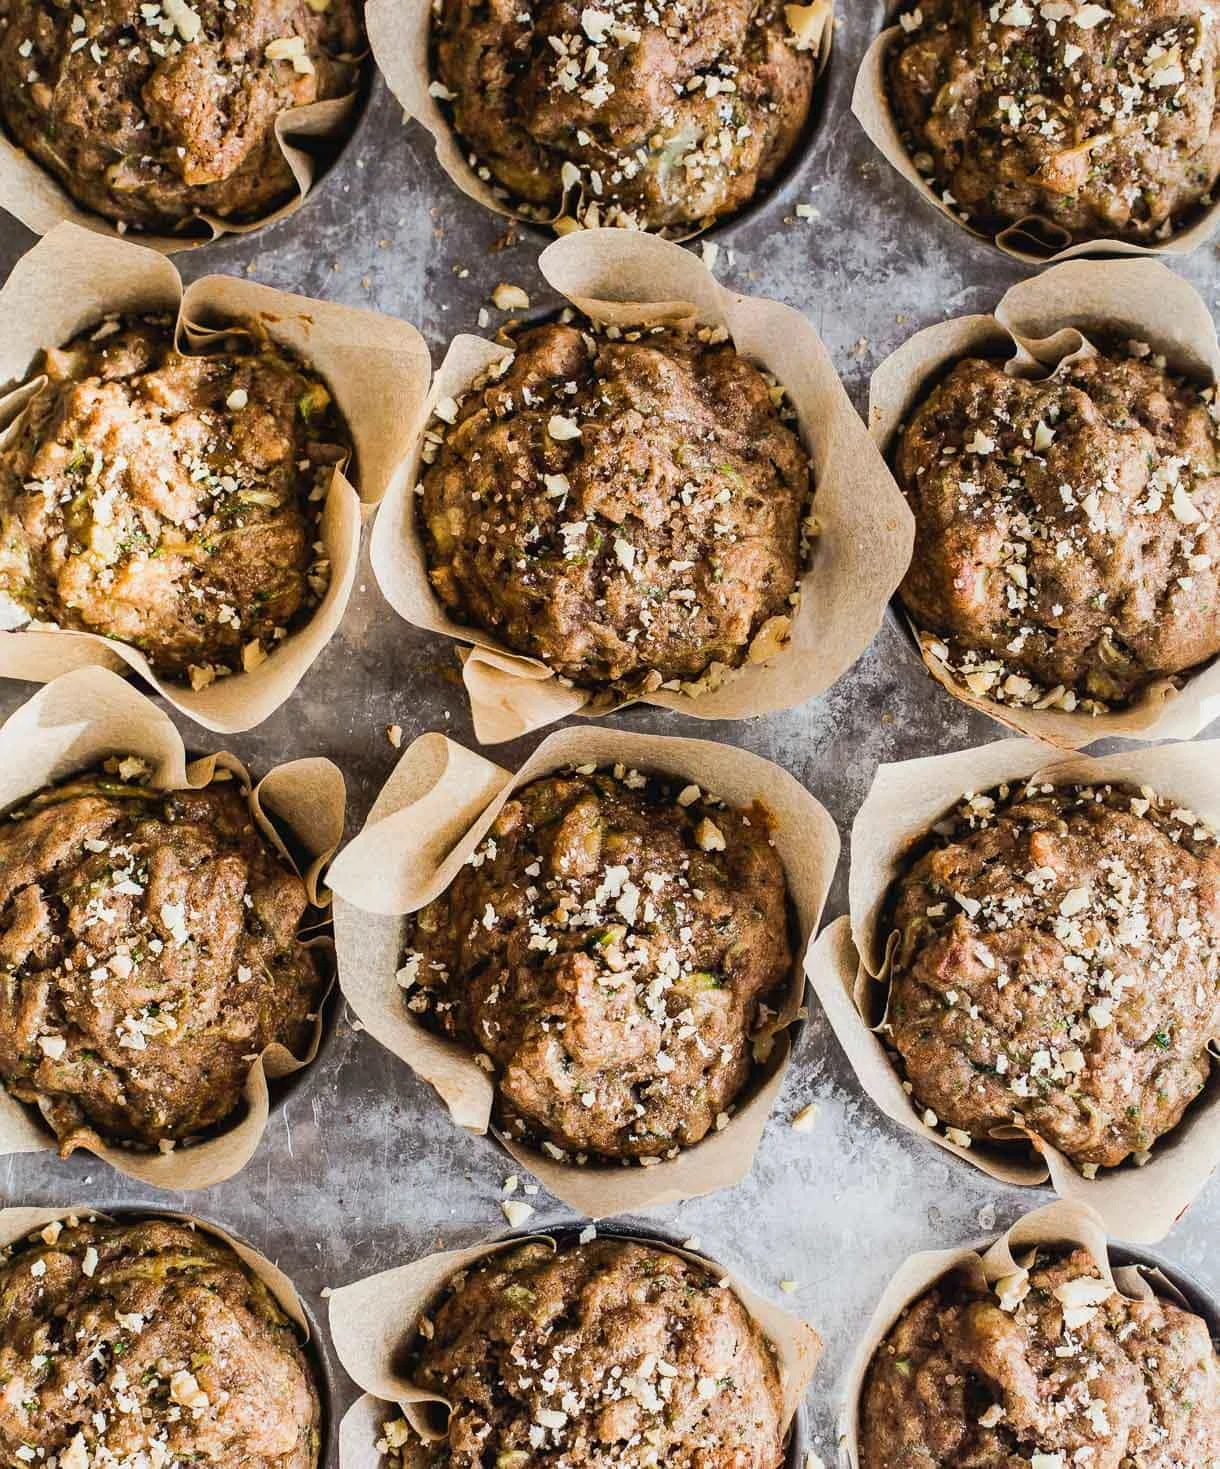 Leftover Sourdough Starter Muffins with Zucchini (made with spelt flour)